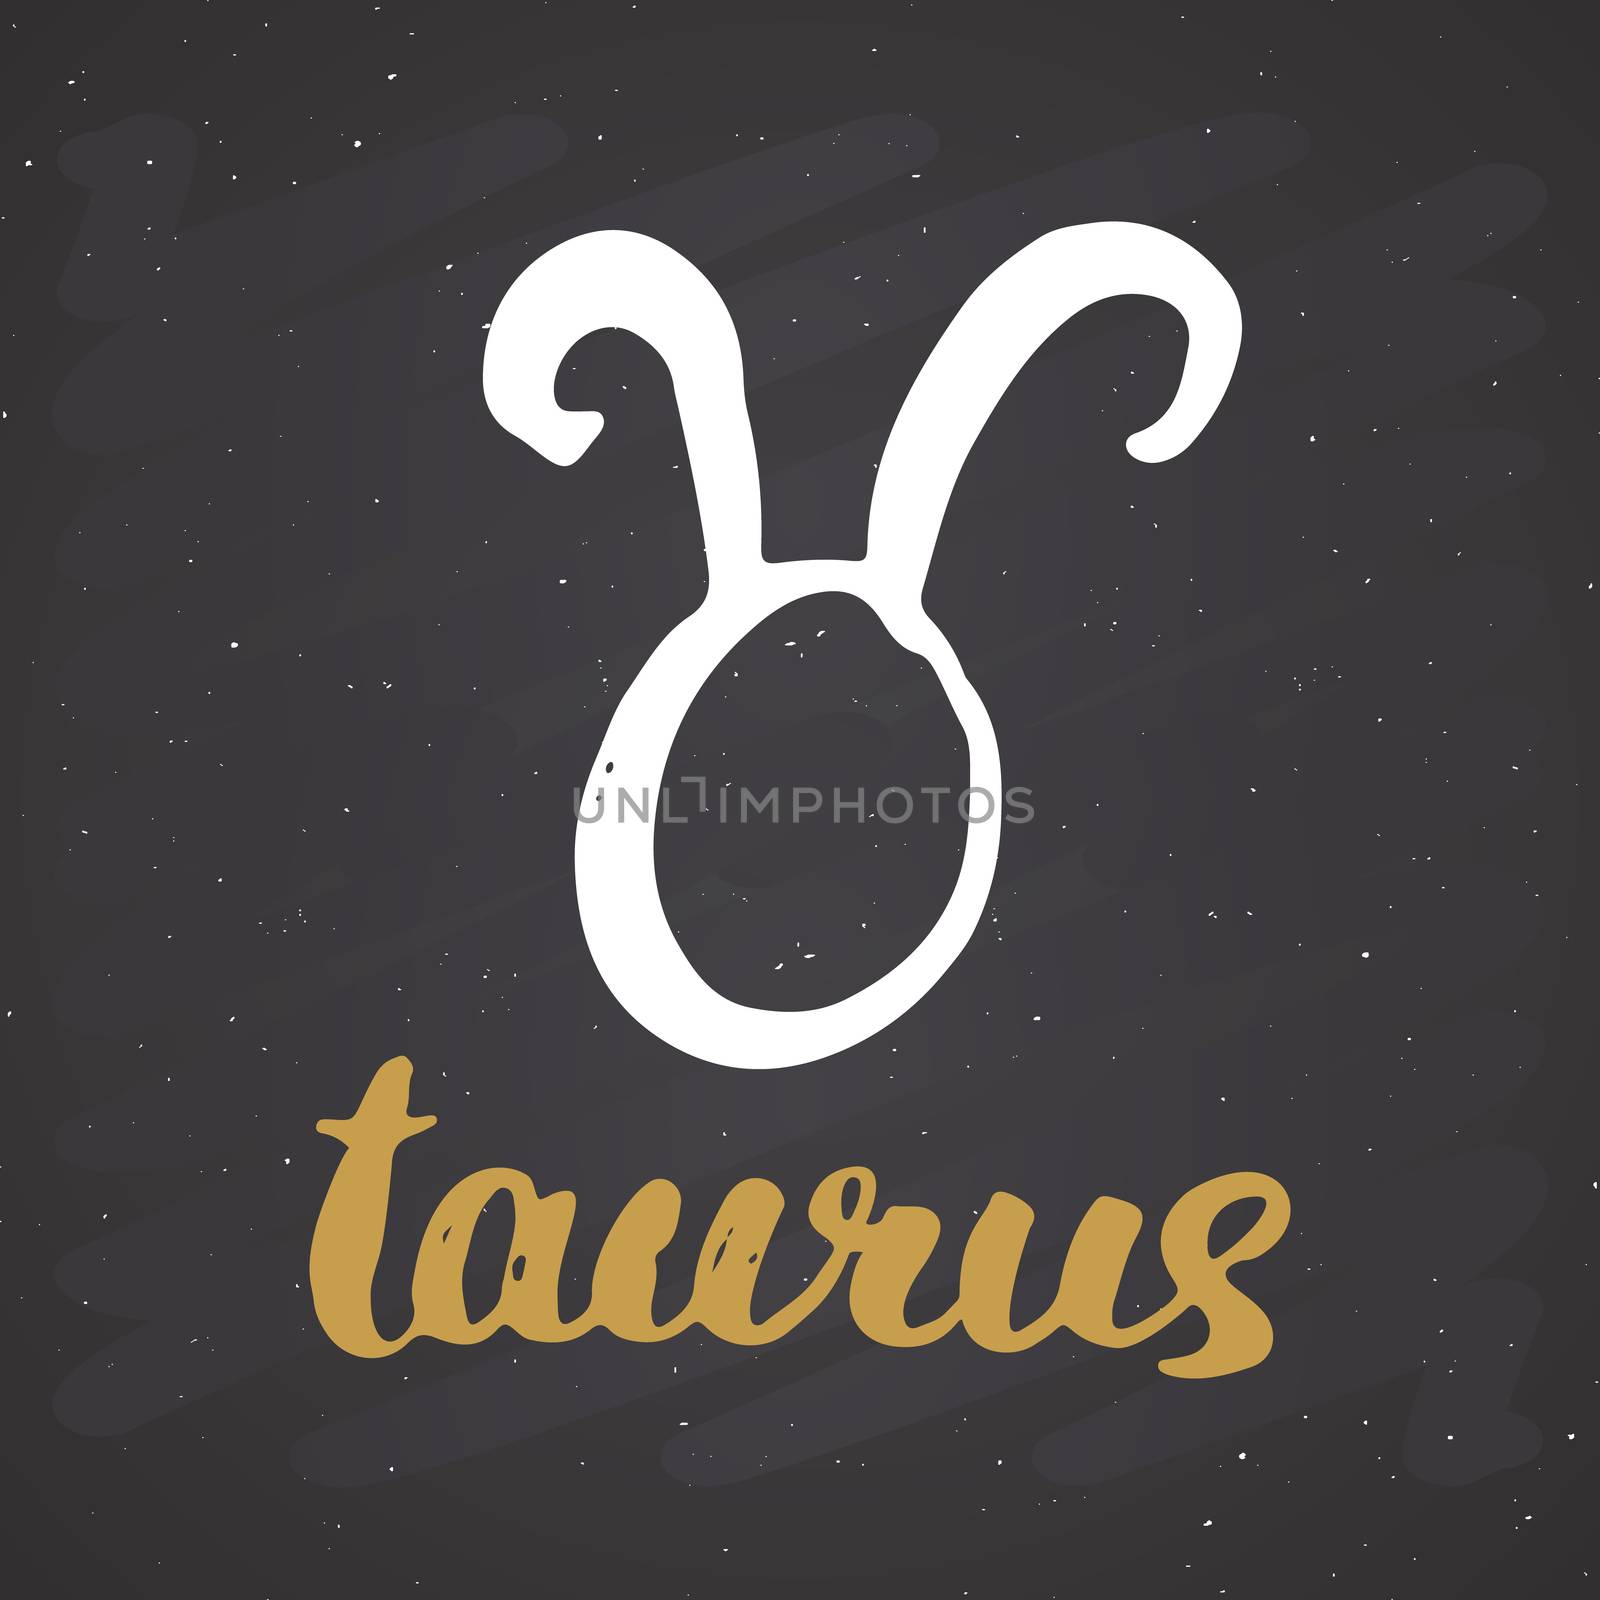 Zodiac sign Taurus and lettering. Hand drawn horoscope astrology symbol, grunge textured design, typography print, vector illustration on chalkboard background.